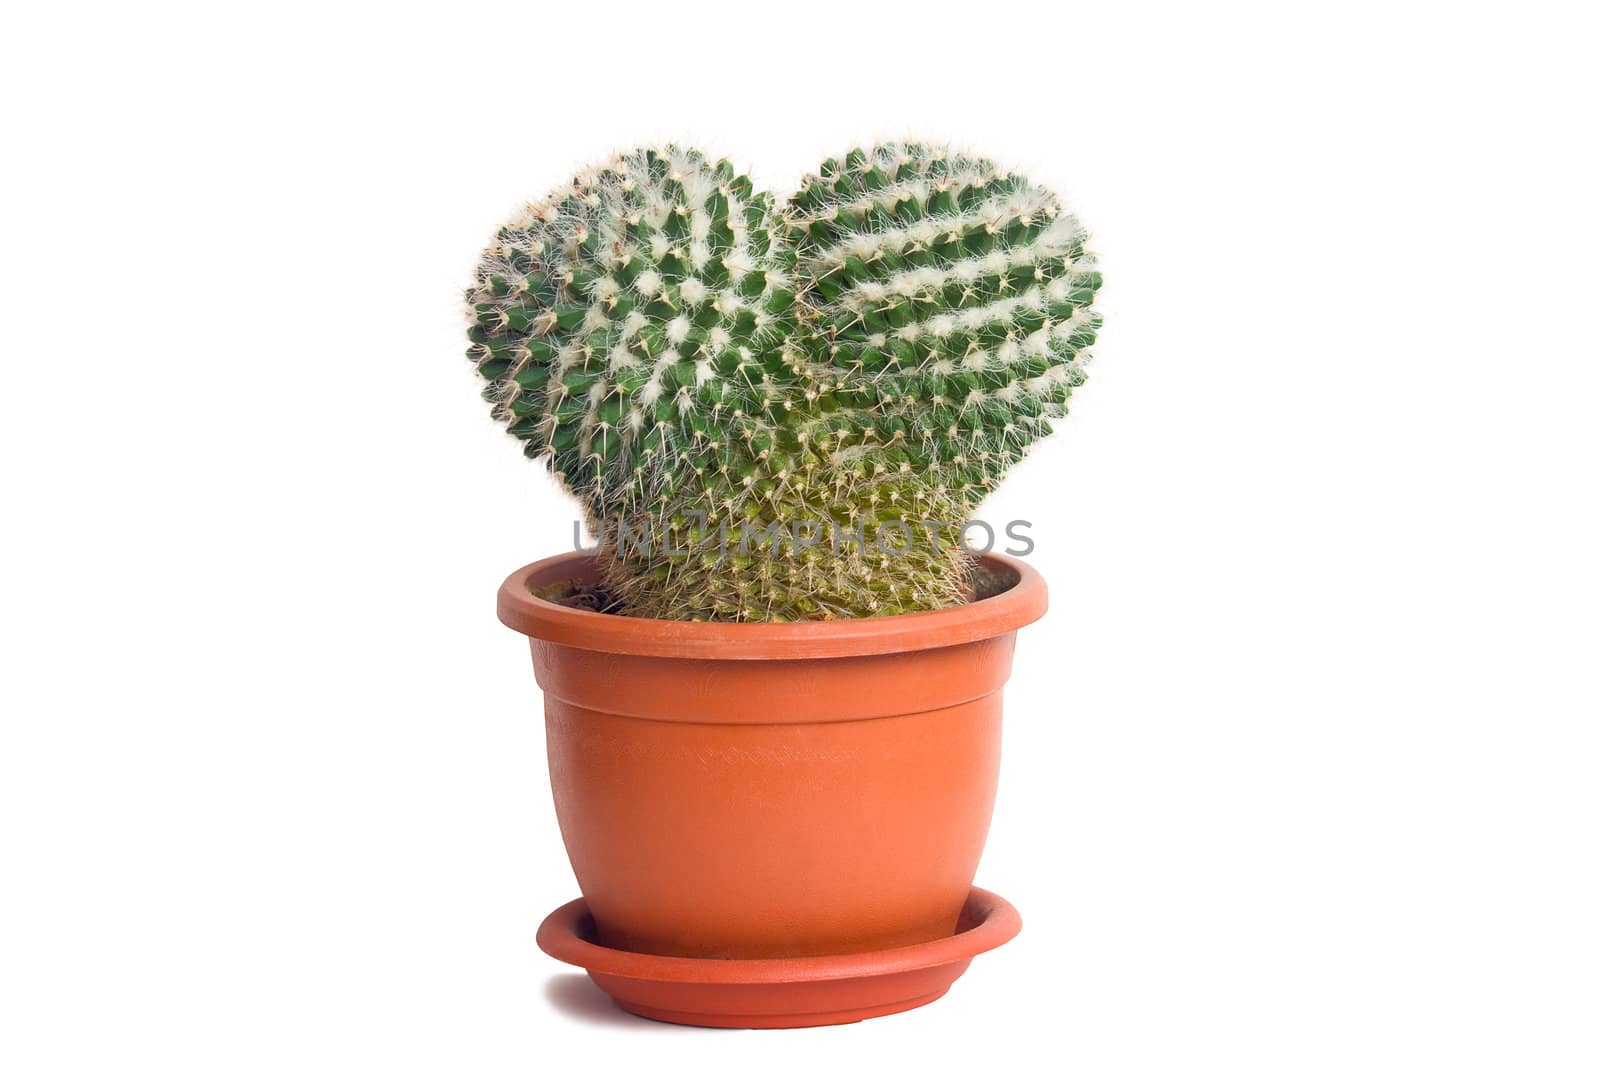 A cactus in a pot by zhannaprokopeva